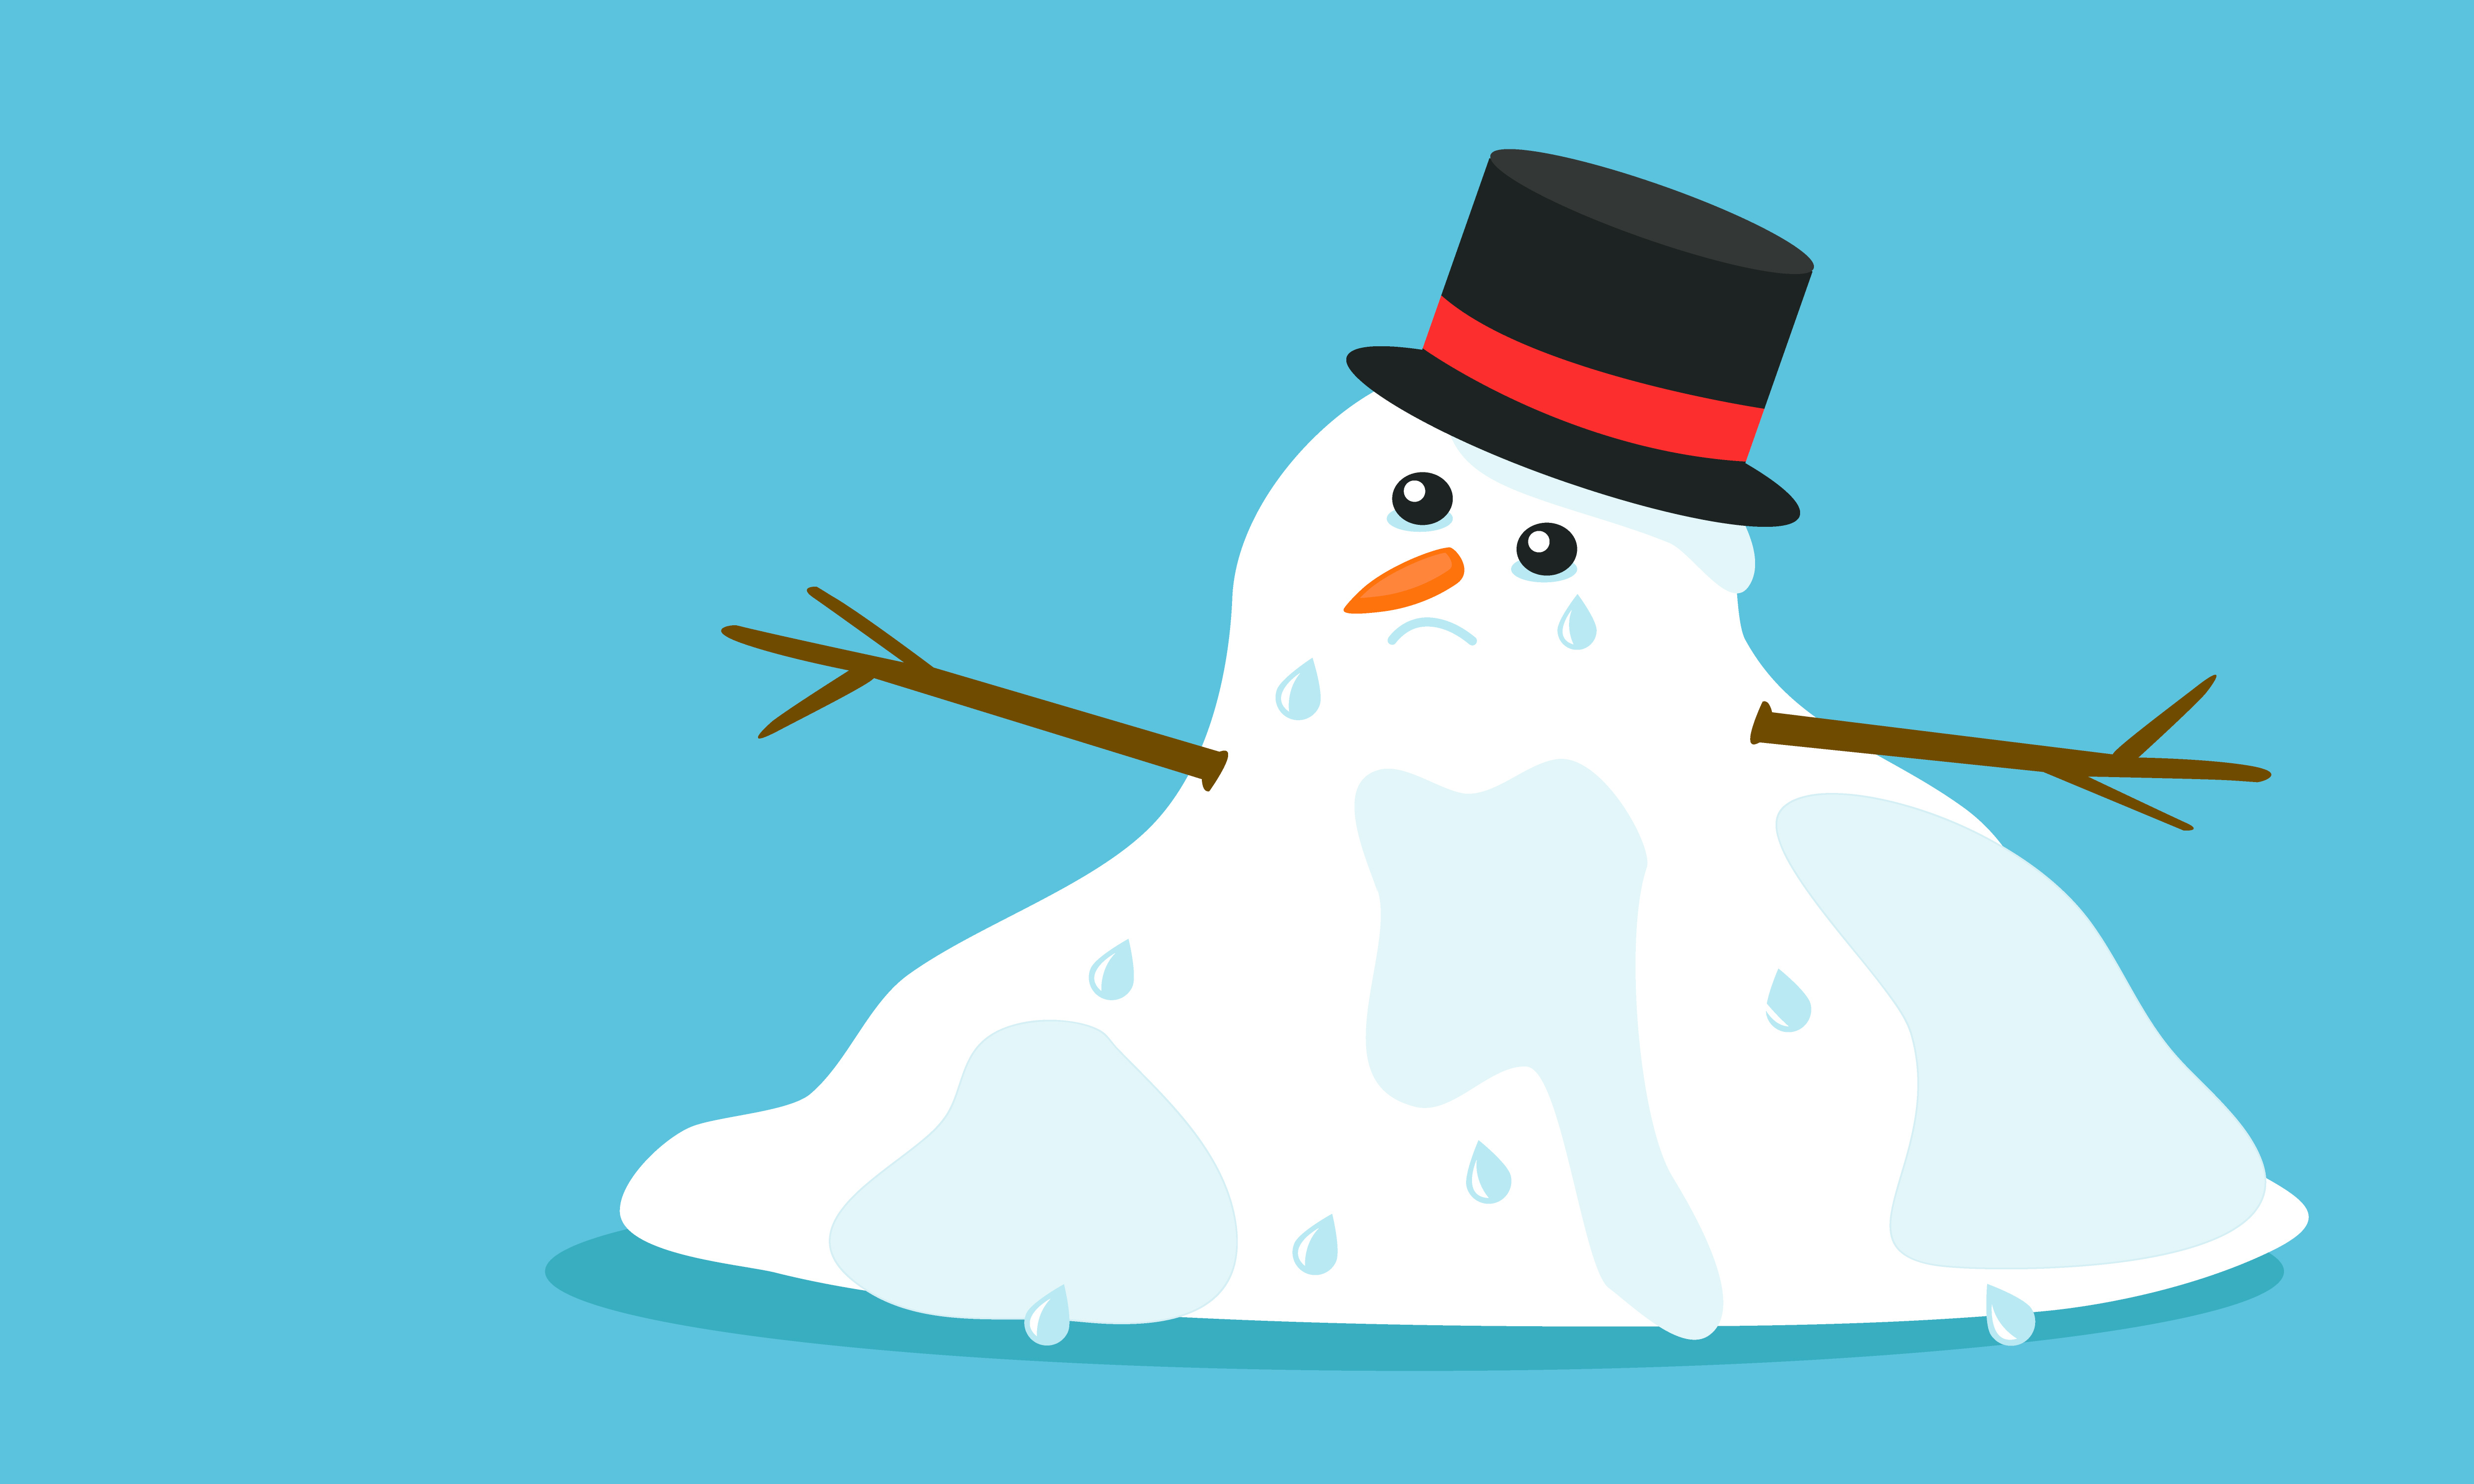 Image of a melted snowman